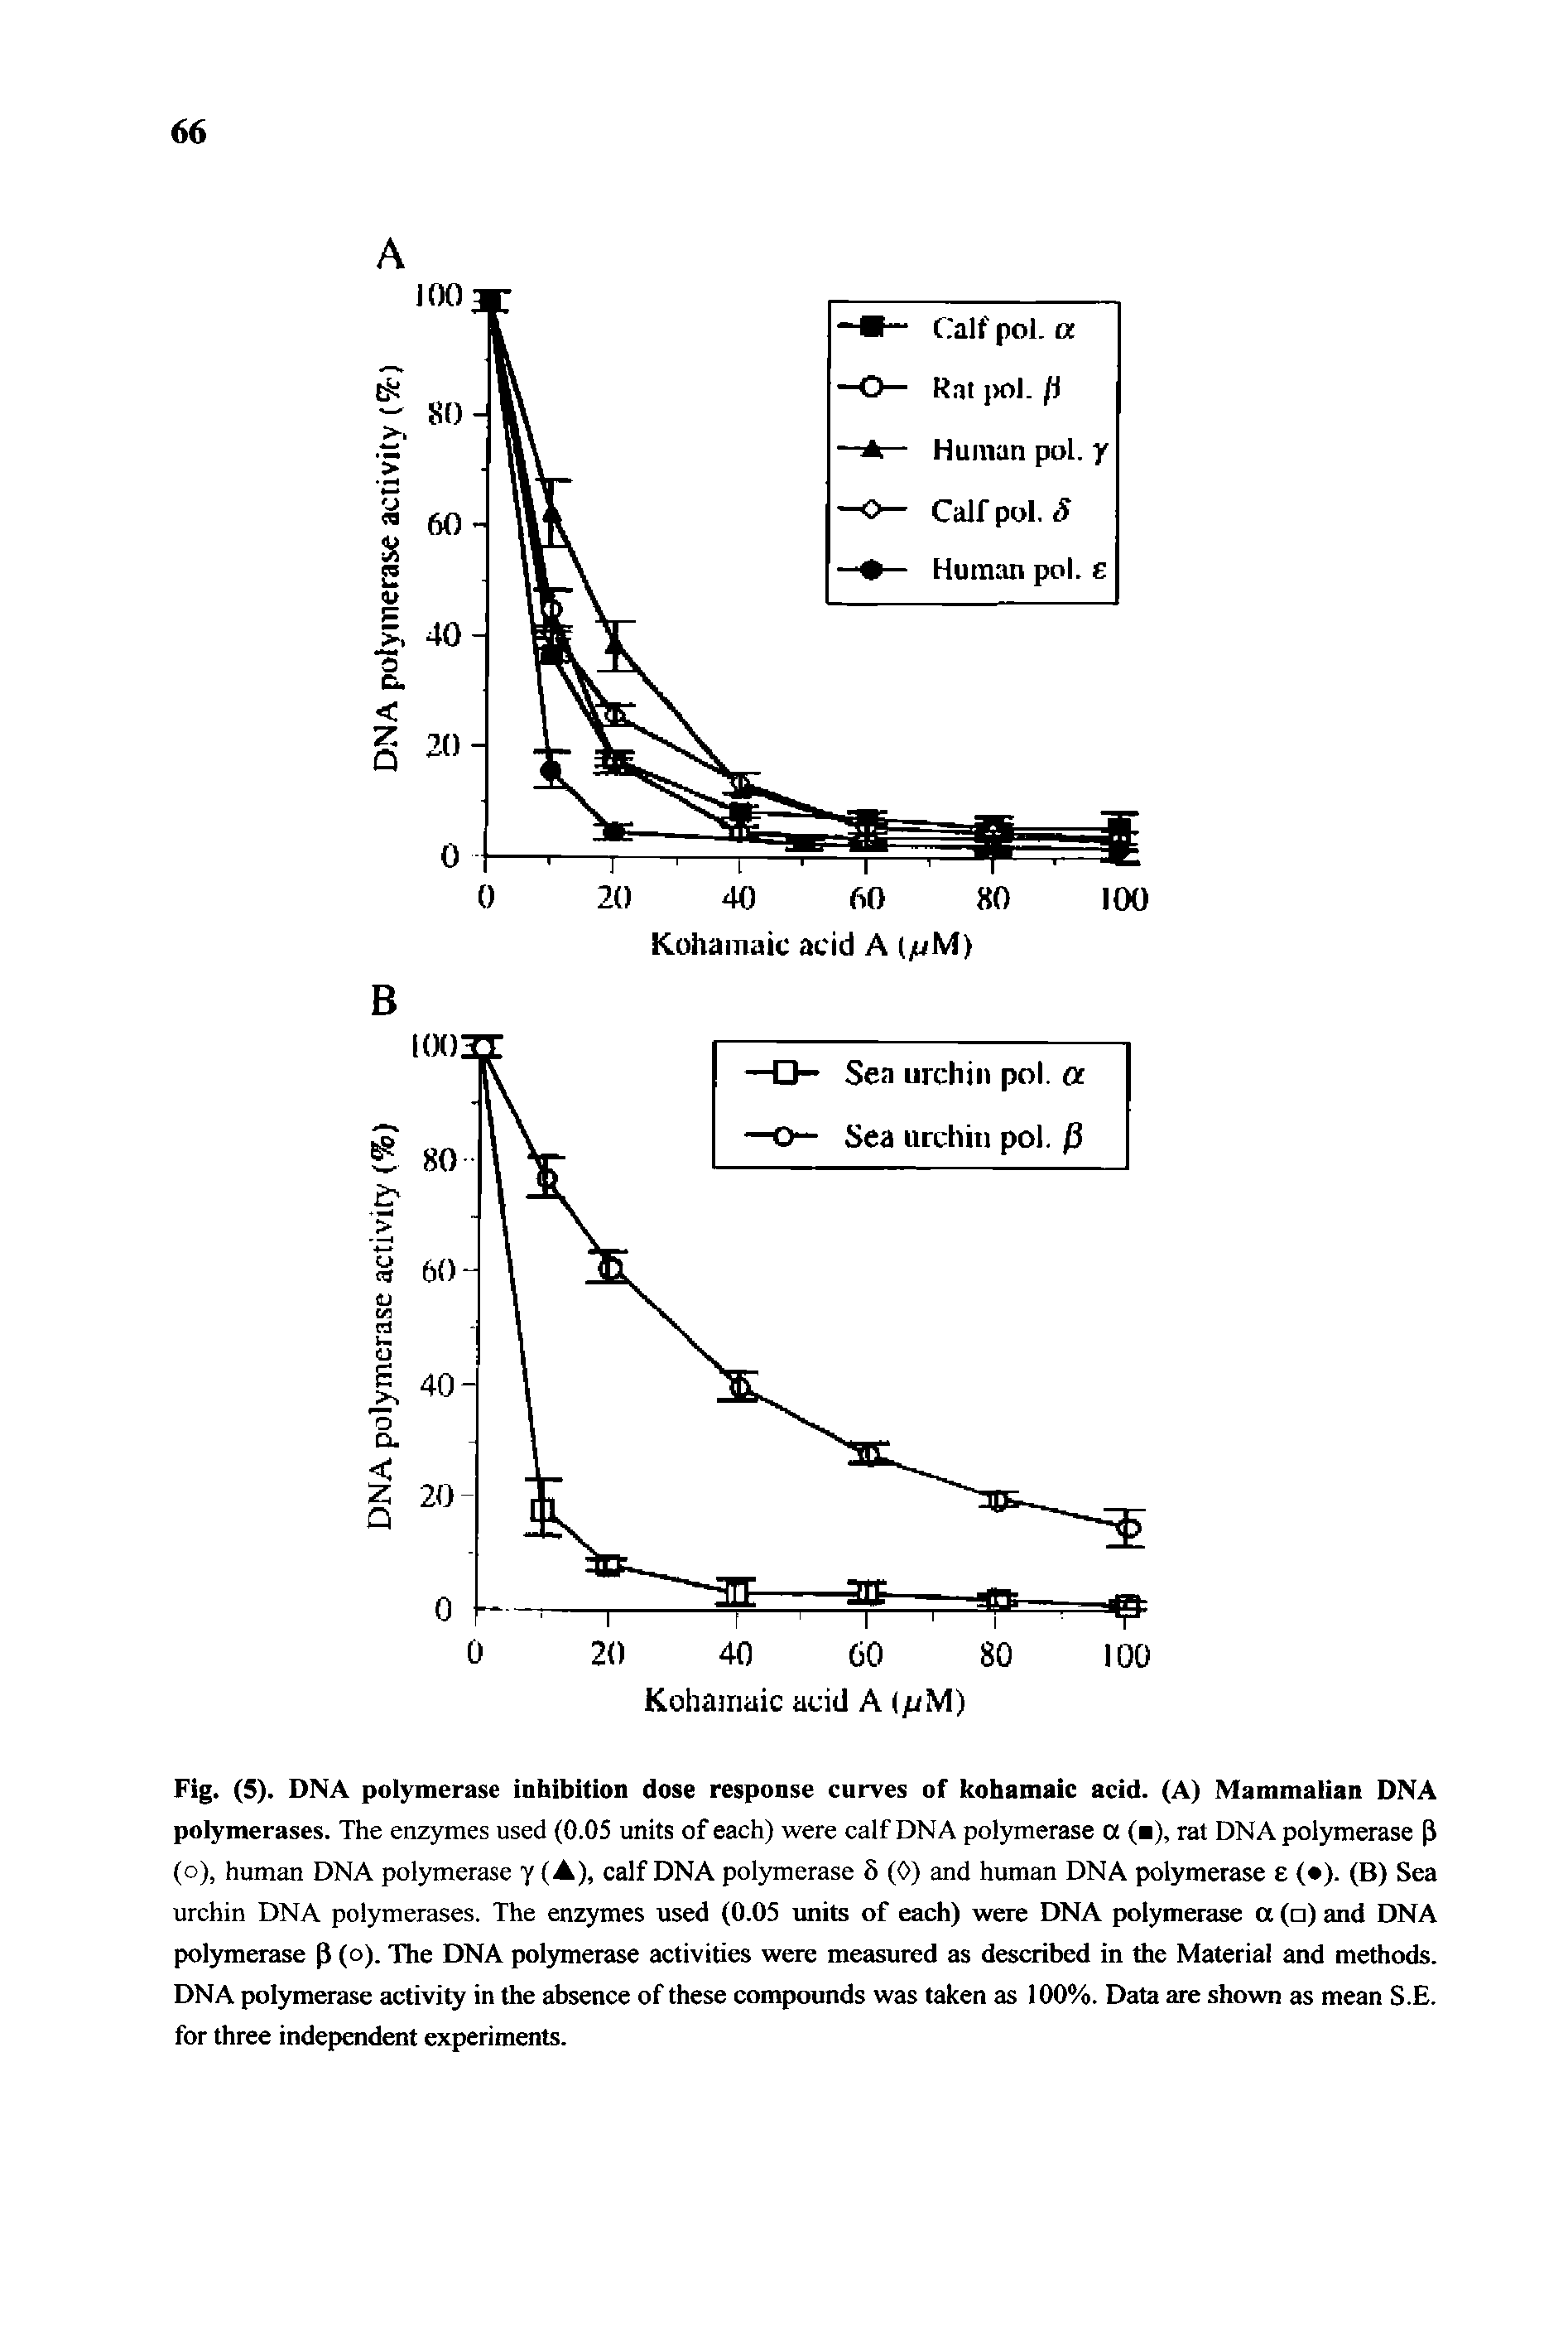 Fig. (5). DNA polymerase inhibition dose response curves of kohamaic acid. (A) Mammalian DNA polymerases. The enzymes used (0.05 units of each) were calf DNA polymerase a ( ), rat DNA polymerase P (o), human DNA polymerase Y (A), calf DNA polymerase 8 (0) and human DNA polymerase 8 ( ). (B) Sea urchin DNA polymerases. The enzymes used (0.05 units of each) were DNA polymerase a ( ) and DNA polymerase p (o). The DNA polymerase activities were measured as described in the Material and methods. DNA polymerase activity in the absence of these compounds was taken as 100%. Data are shown as mean S.E. for three independent experiments.